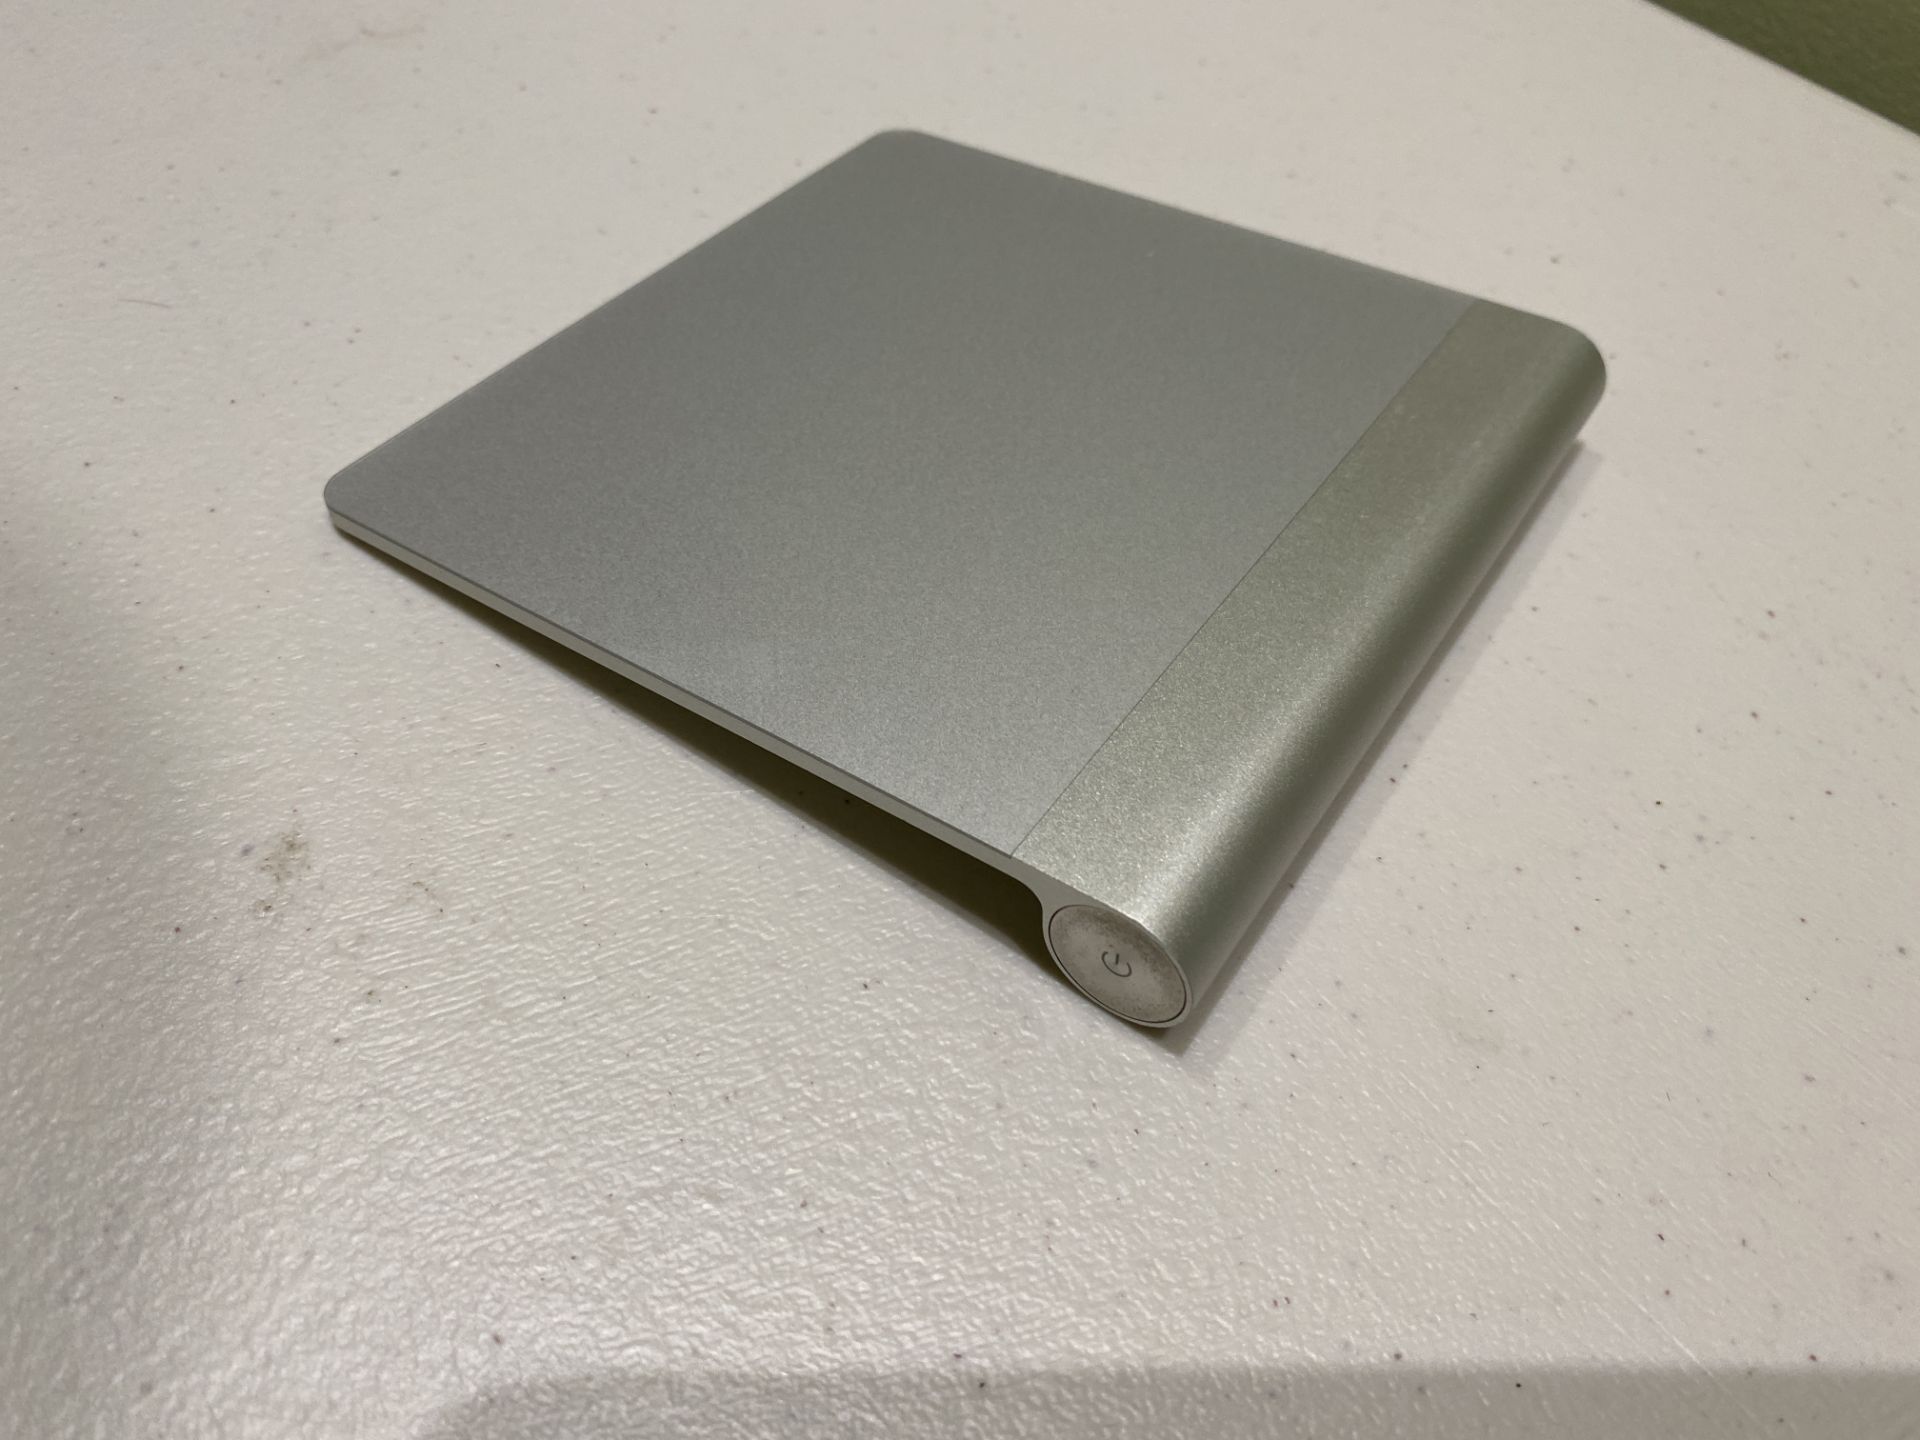 Apple Wireless Multi touch Magic Trackpad, Silver - Image 3 of 6